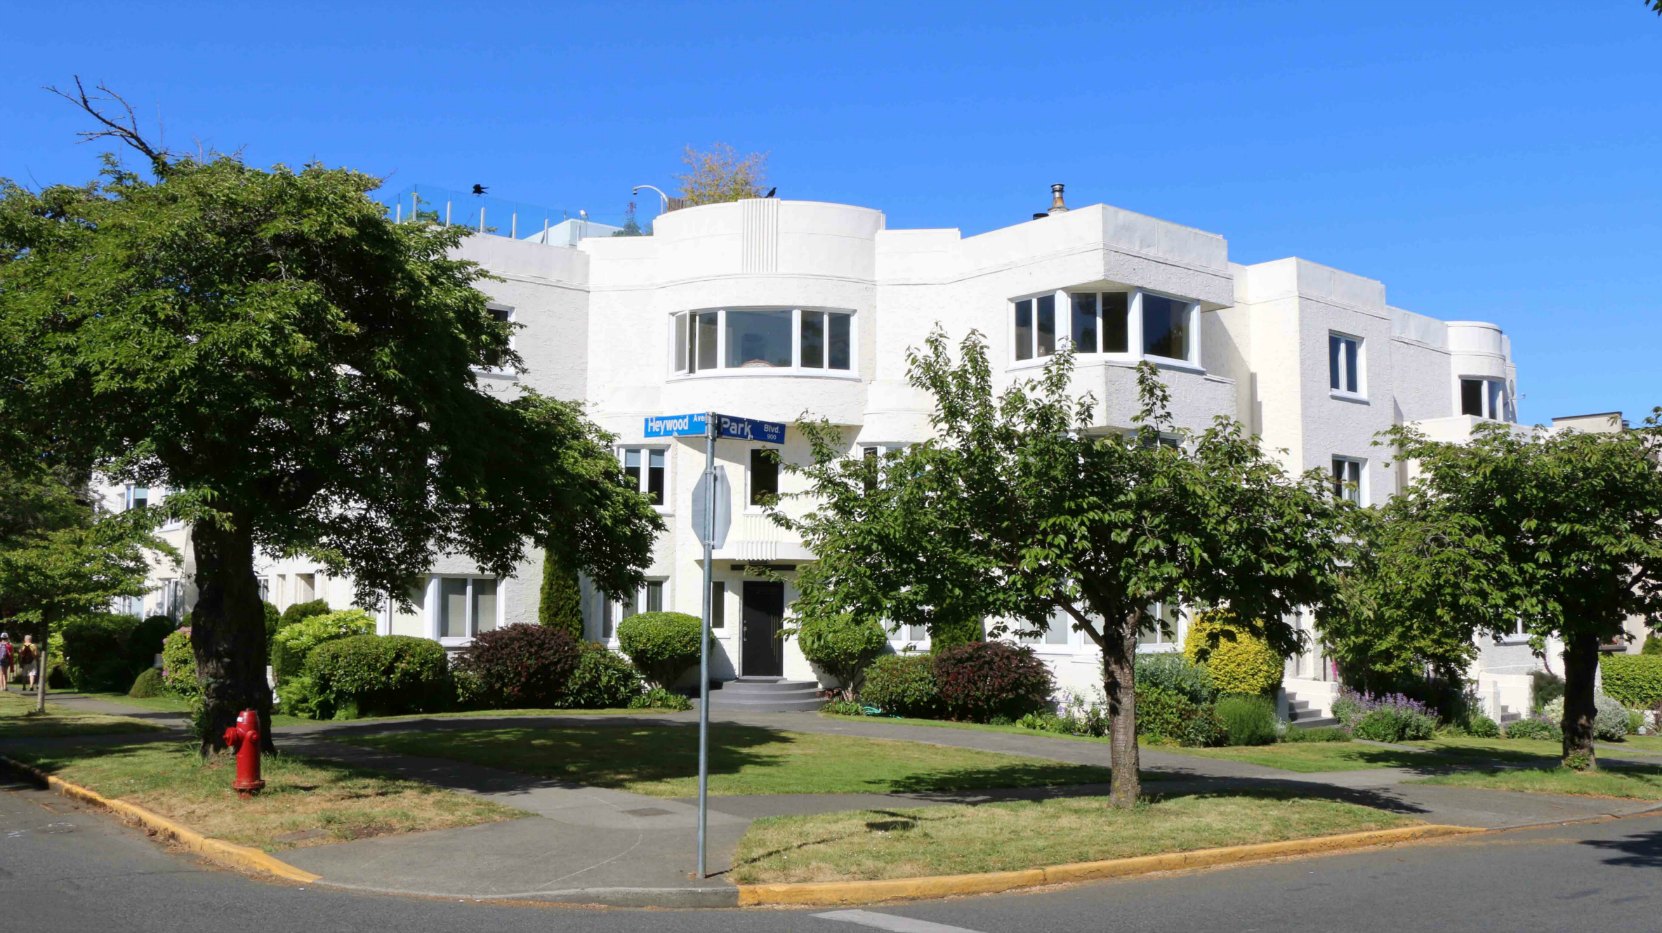 900 Park Boulevard, Tweedsmuir Mansions, built in 1936, is one of Victoria's best examples of Art Deco architecture